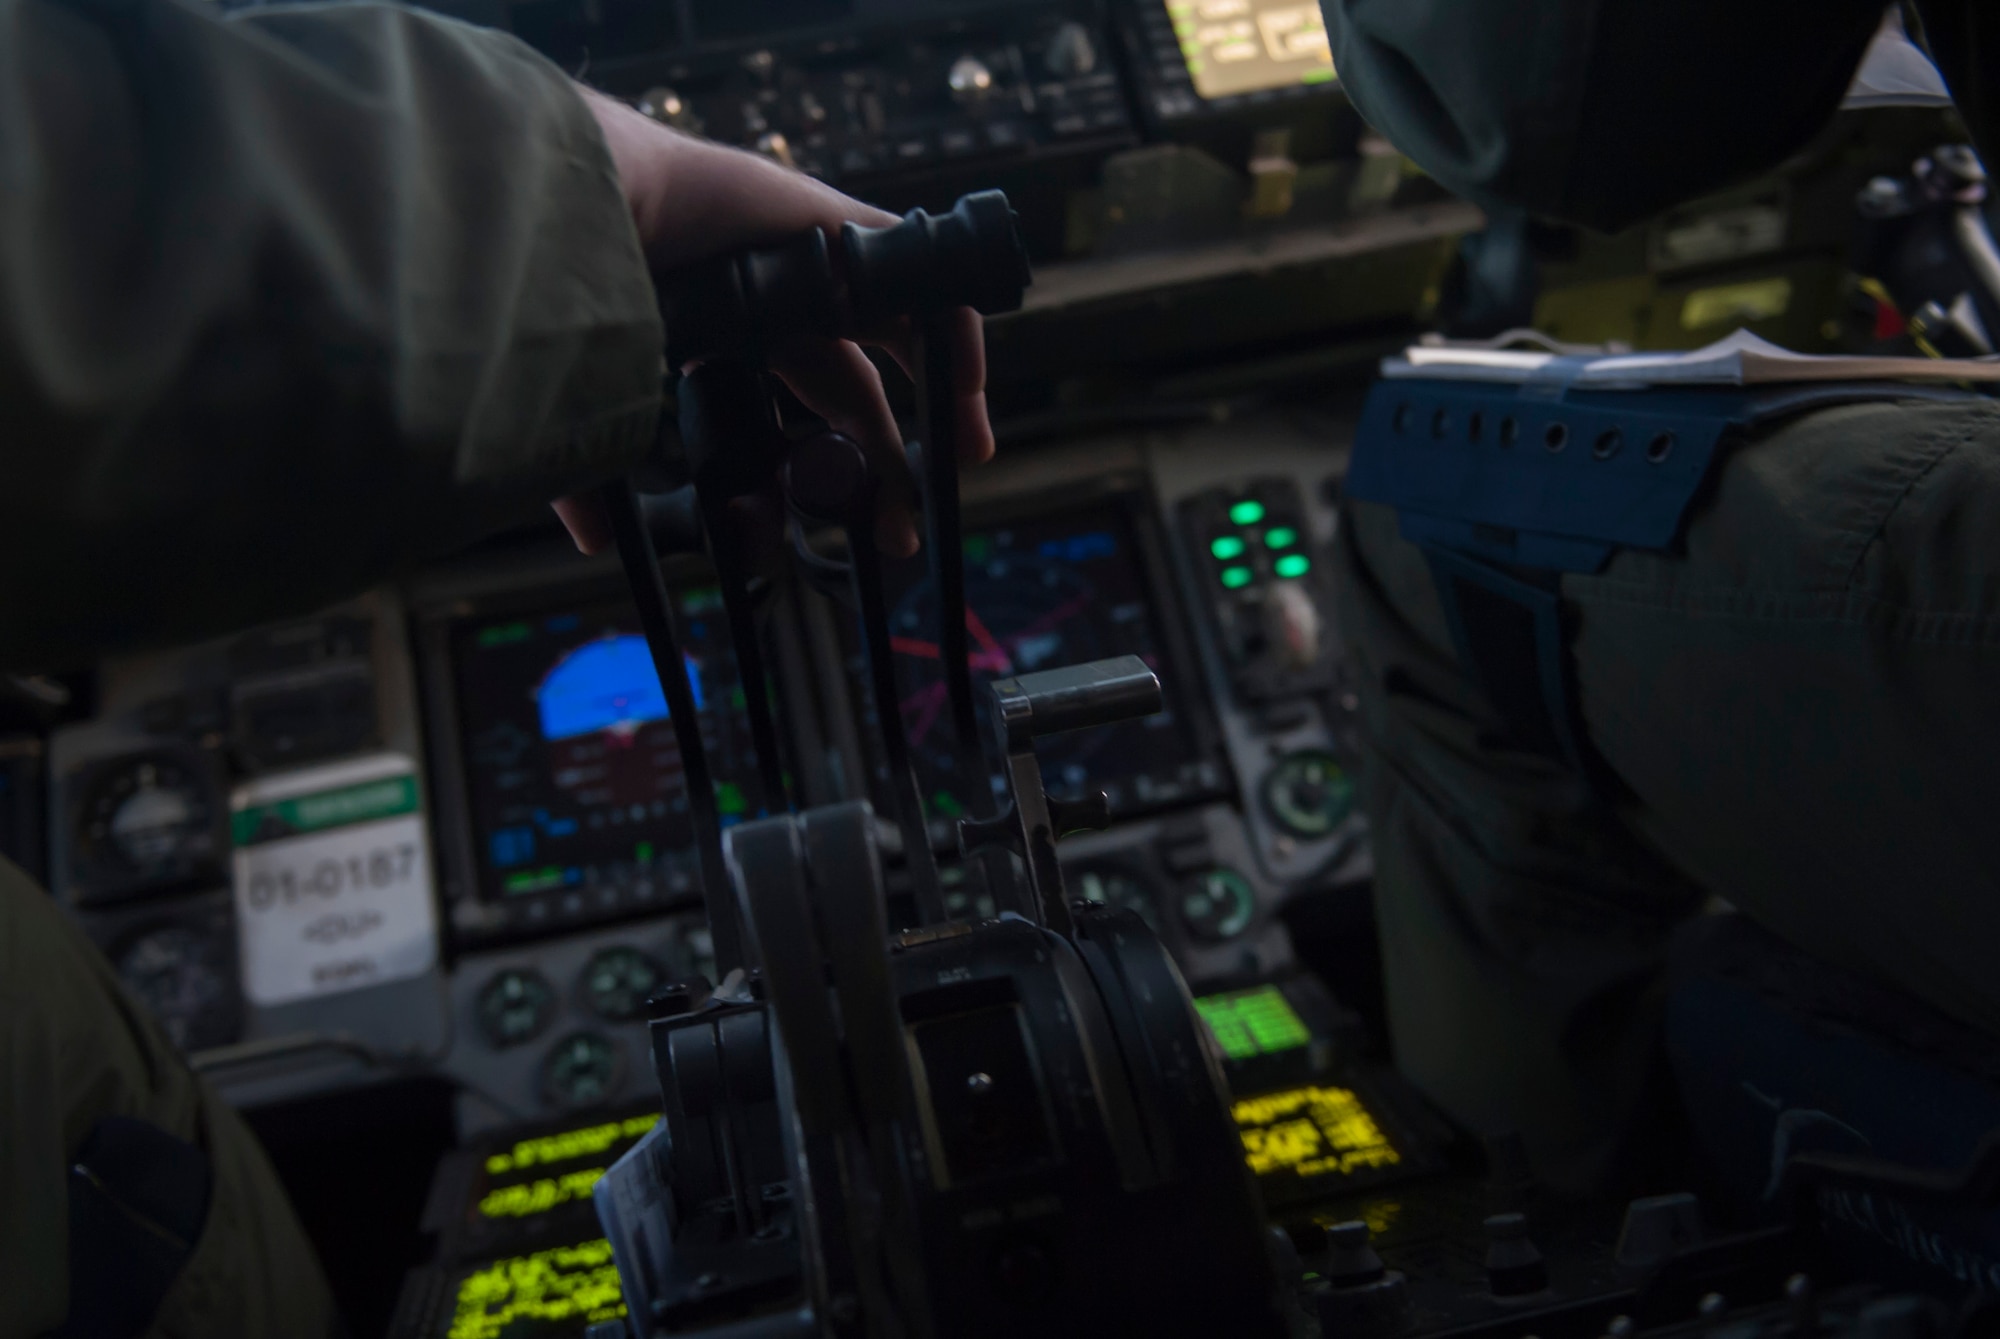 Capt. Mike “Havac” Gilpatrick, a pilot assigned to 9th Airlift Squadron pilot, Joint Base McGuire-Dix-Lakehurst, N.J., rest his hand on the throttle of a C-17 Globemaster III on Nellis Air Force Base, Nev., Dec. 10, 2016. The inherent flexibility and performance of the C-17 force improve the ability of the total airlift system to fulfill the worldwide air mobility requirements of the United States. (U.S. Air Force photo by Airman 1st Class Kevin Tanenbaum)